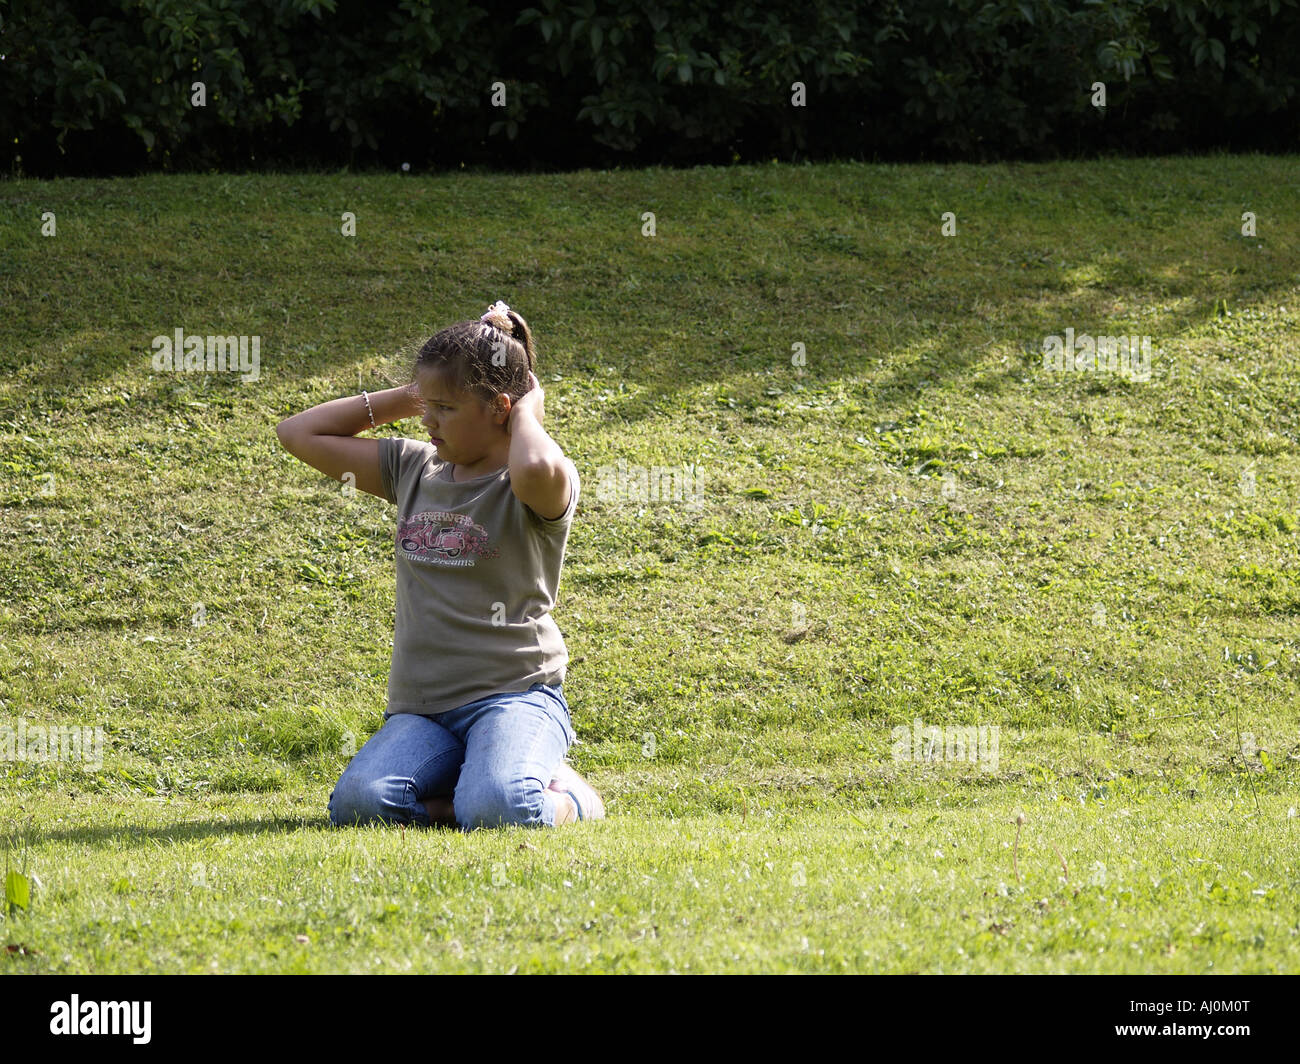 Teenage girl sitting on grass, fussing with her hair Stock Photo